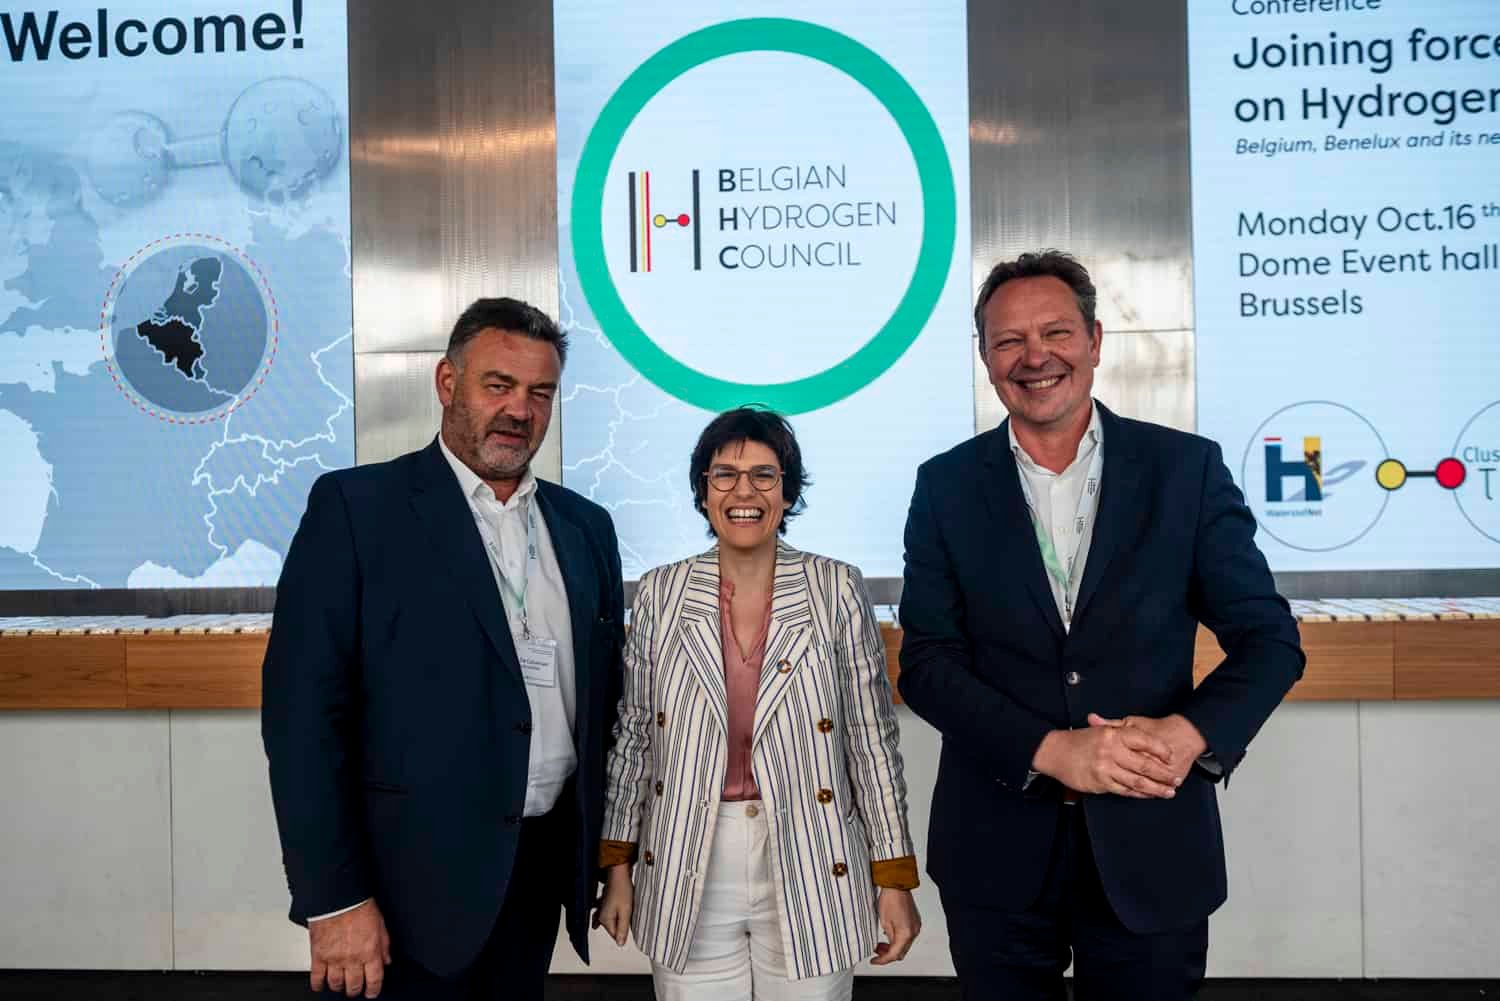 In Brussels, it became clear once again: hydrogen has as much potential as challenges in Belgium